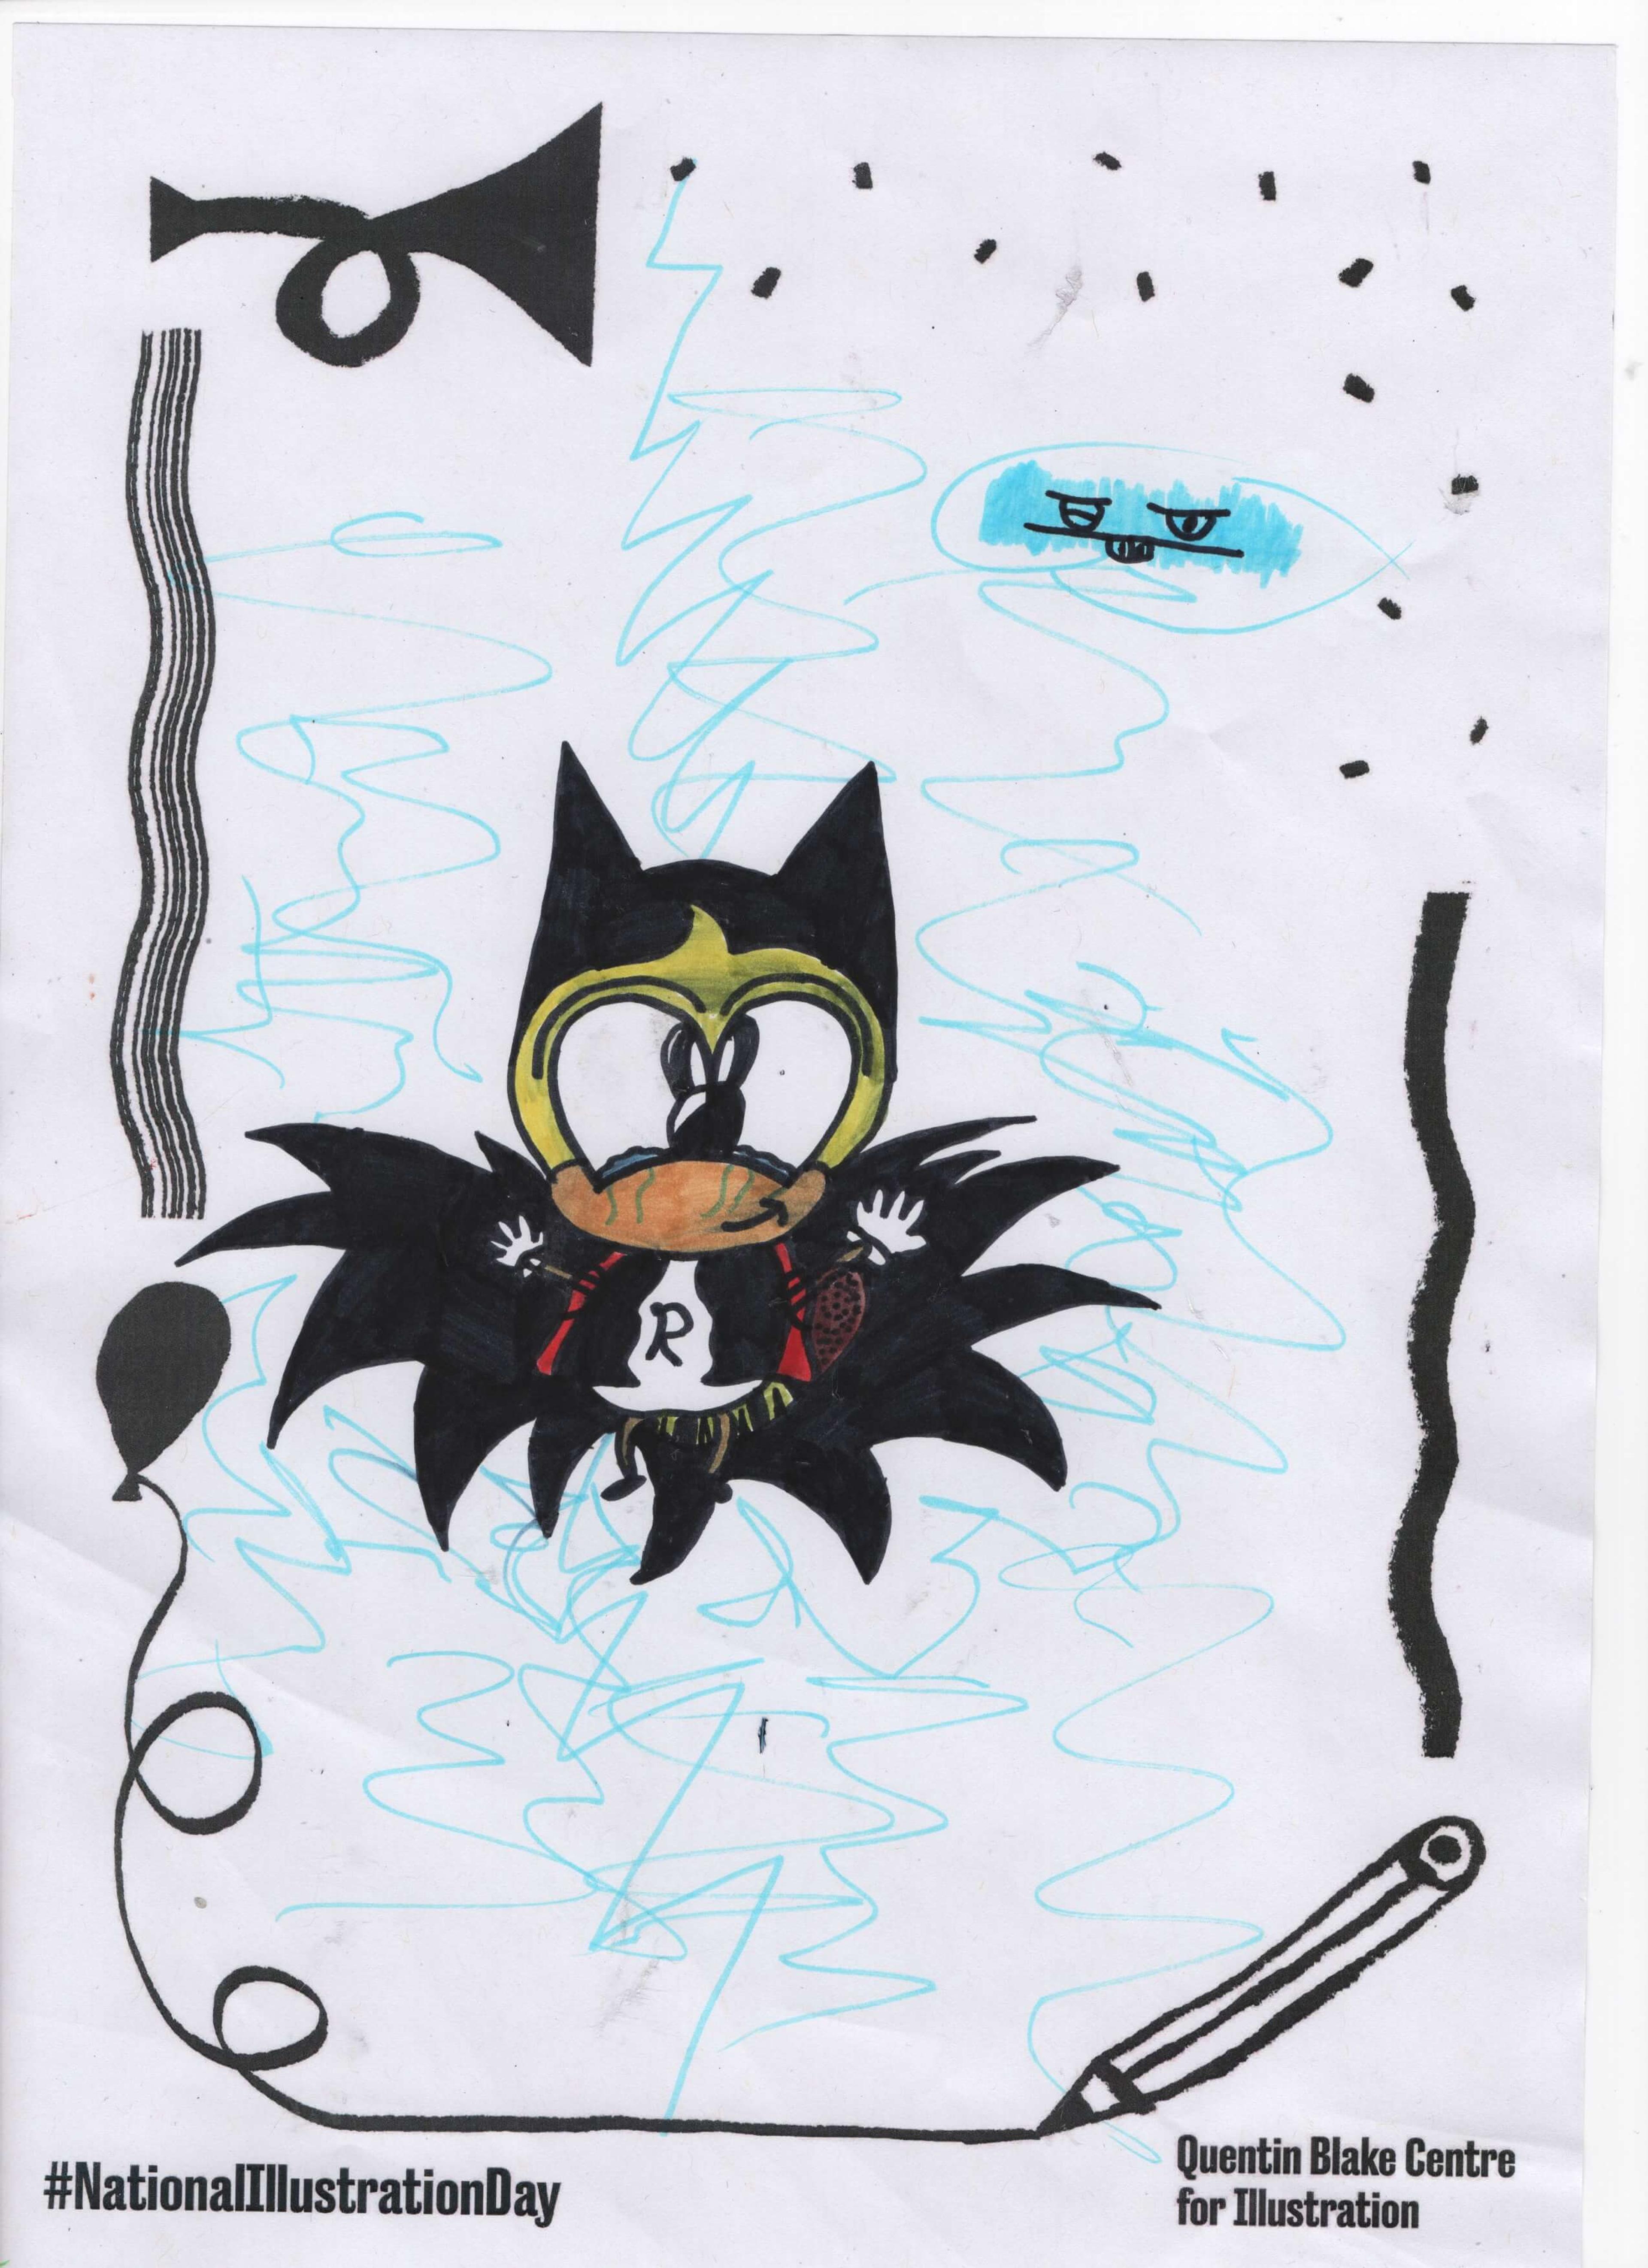 Cartoon drawing of a smiling superhero character wearing a Batman-style mask and cape. They have the letter 'R' on their chest.